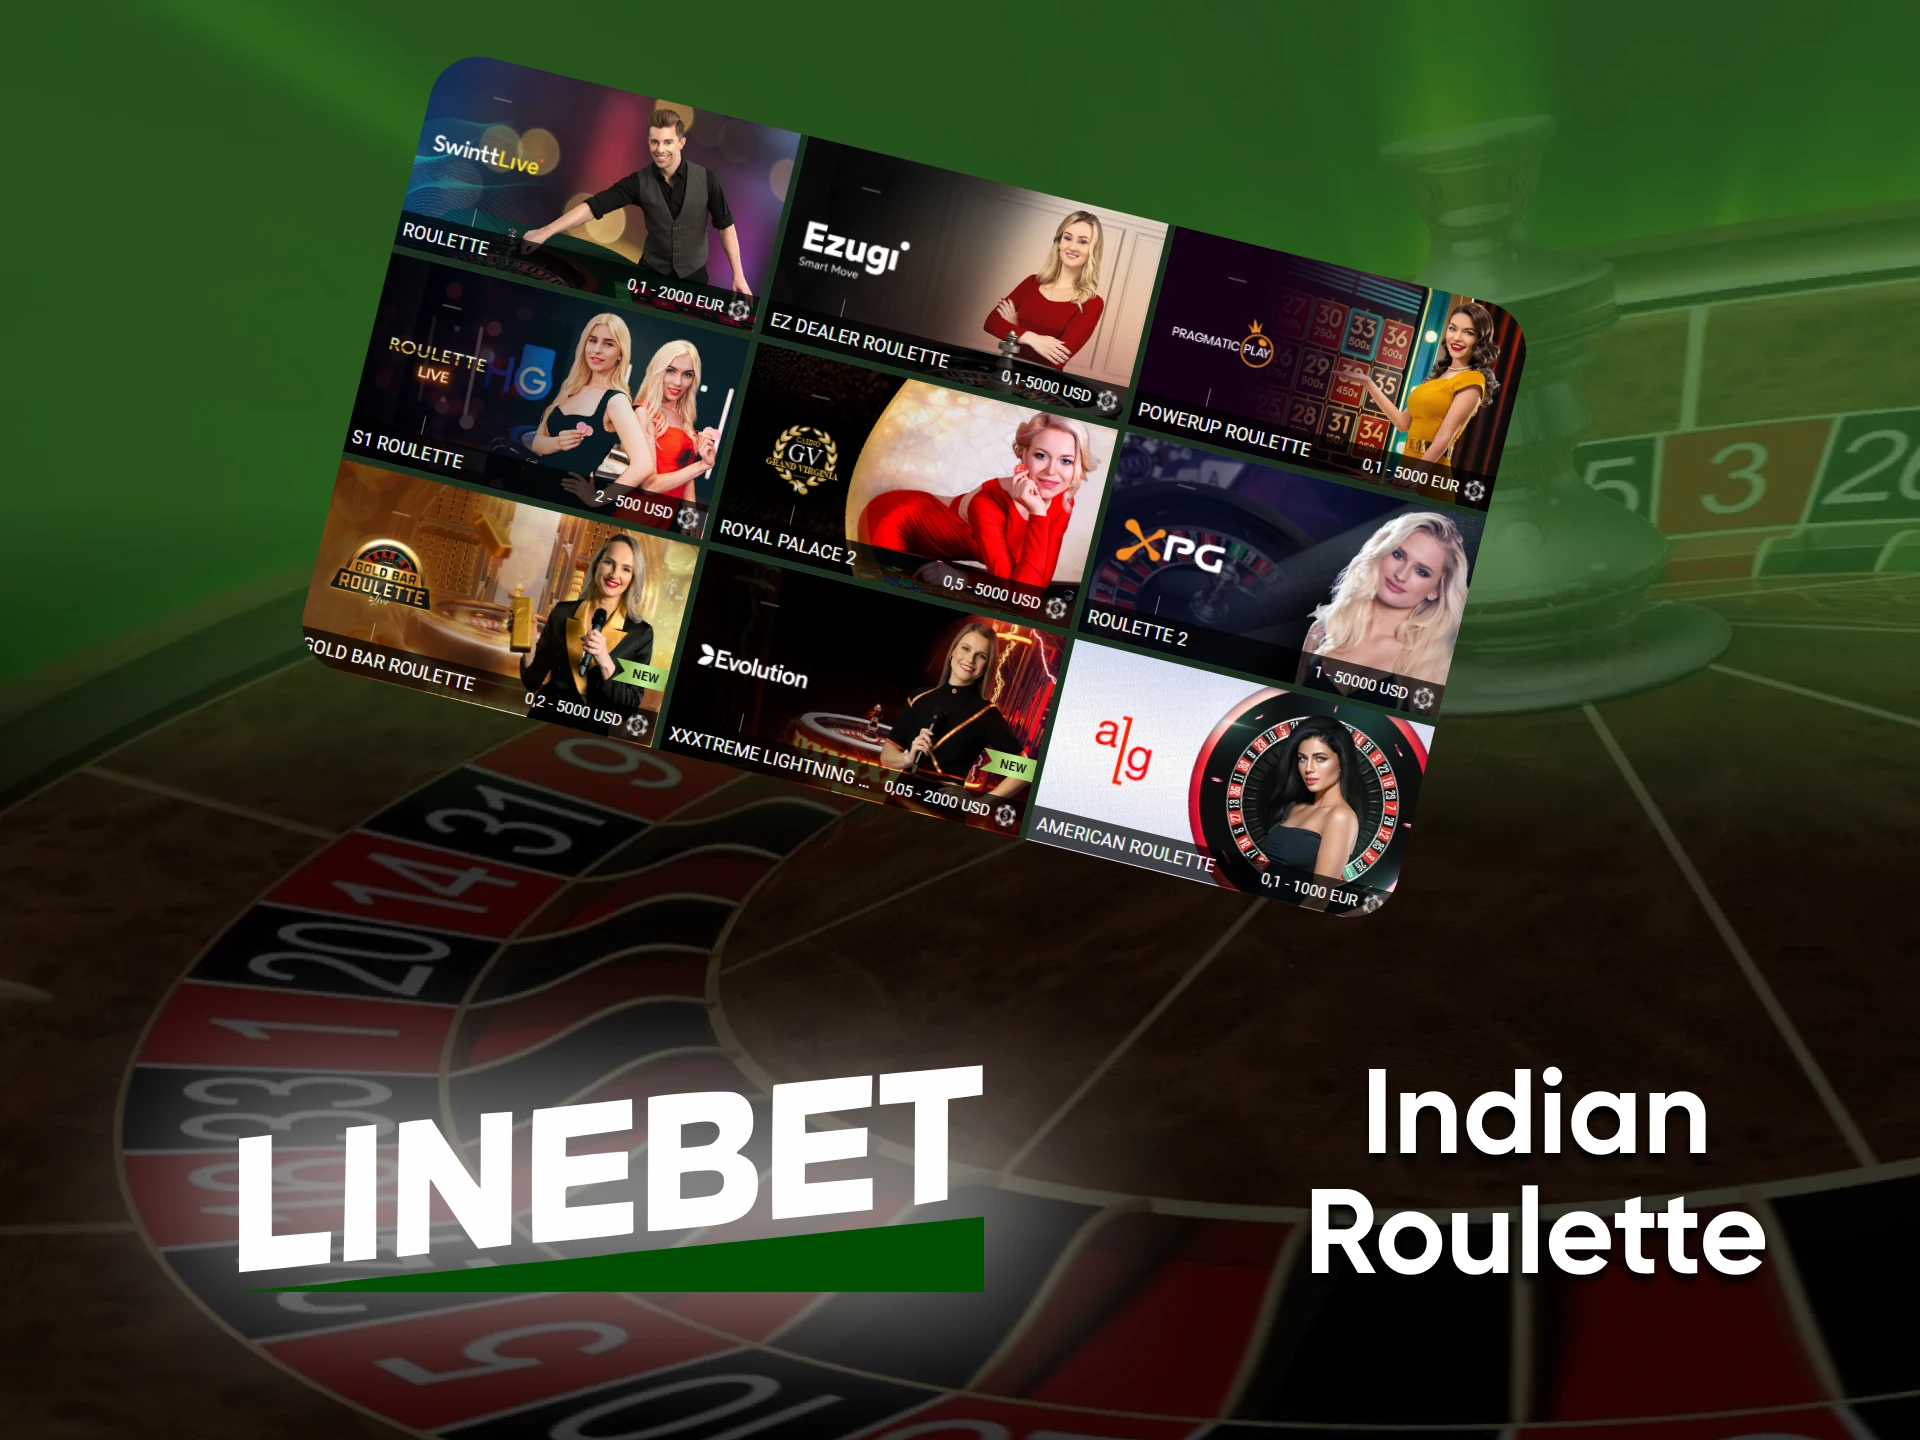 At Linebet casino you can play Indian Roulette.